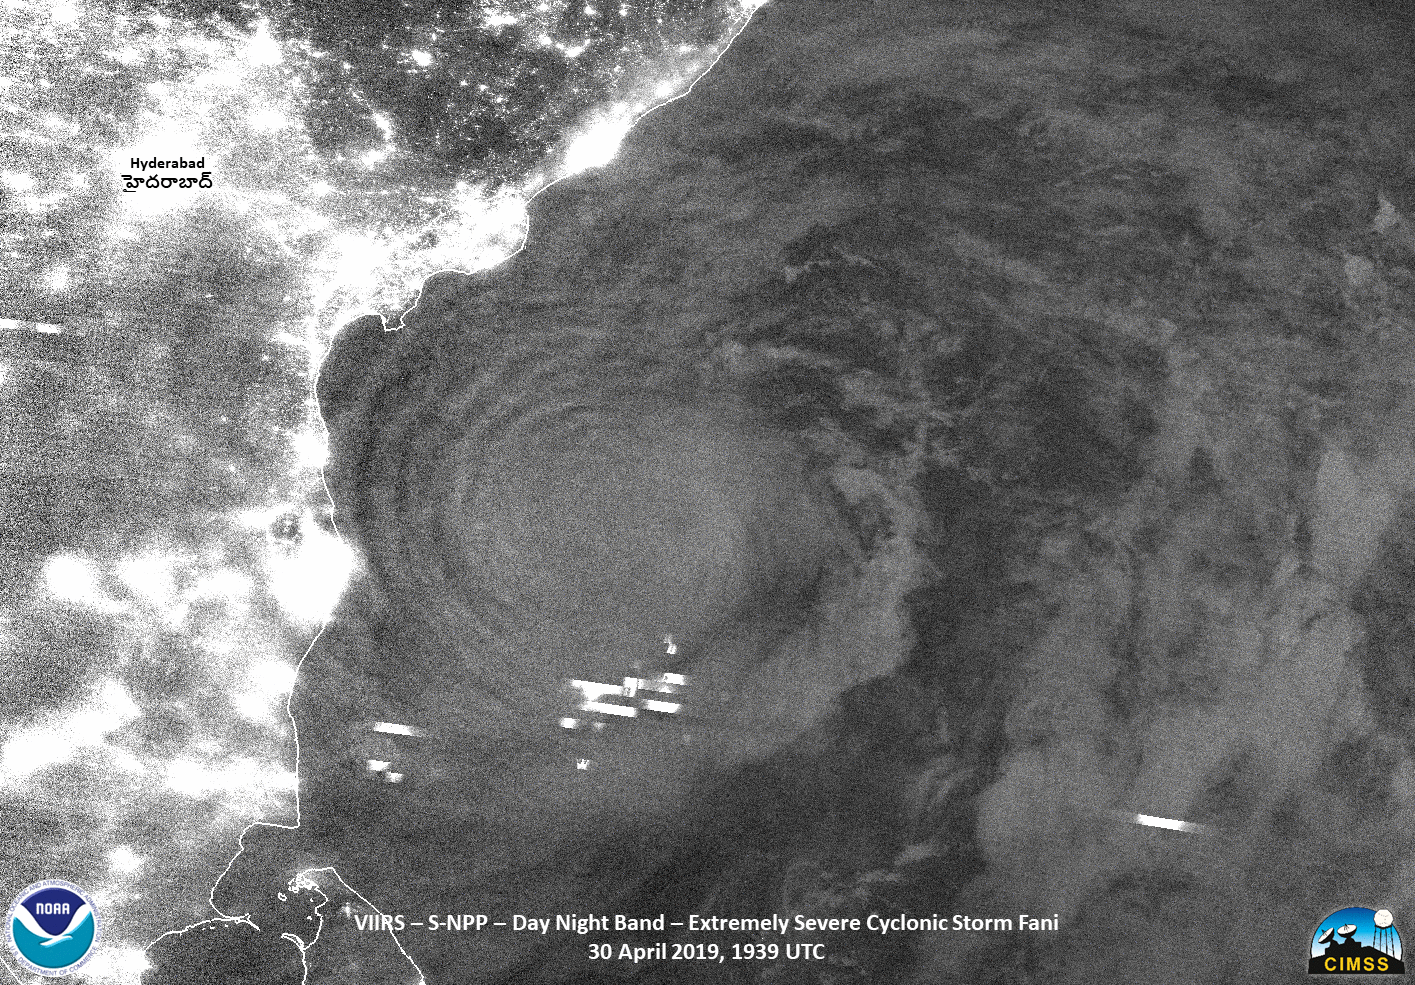 Suomi NPP VIIRS Day/Night Band (0.7 µm) and Infrared Window (11.45 µm) images at 1939 UTC on 30 April [click to enlarge]